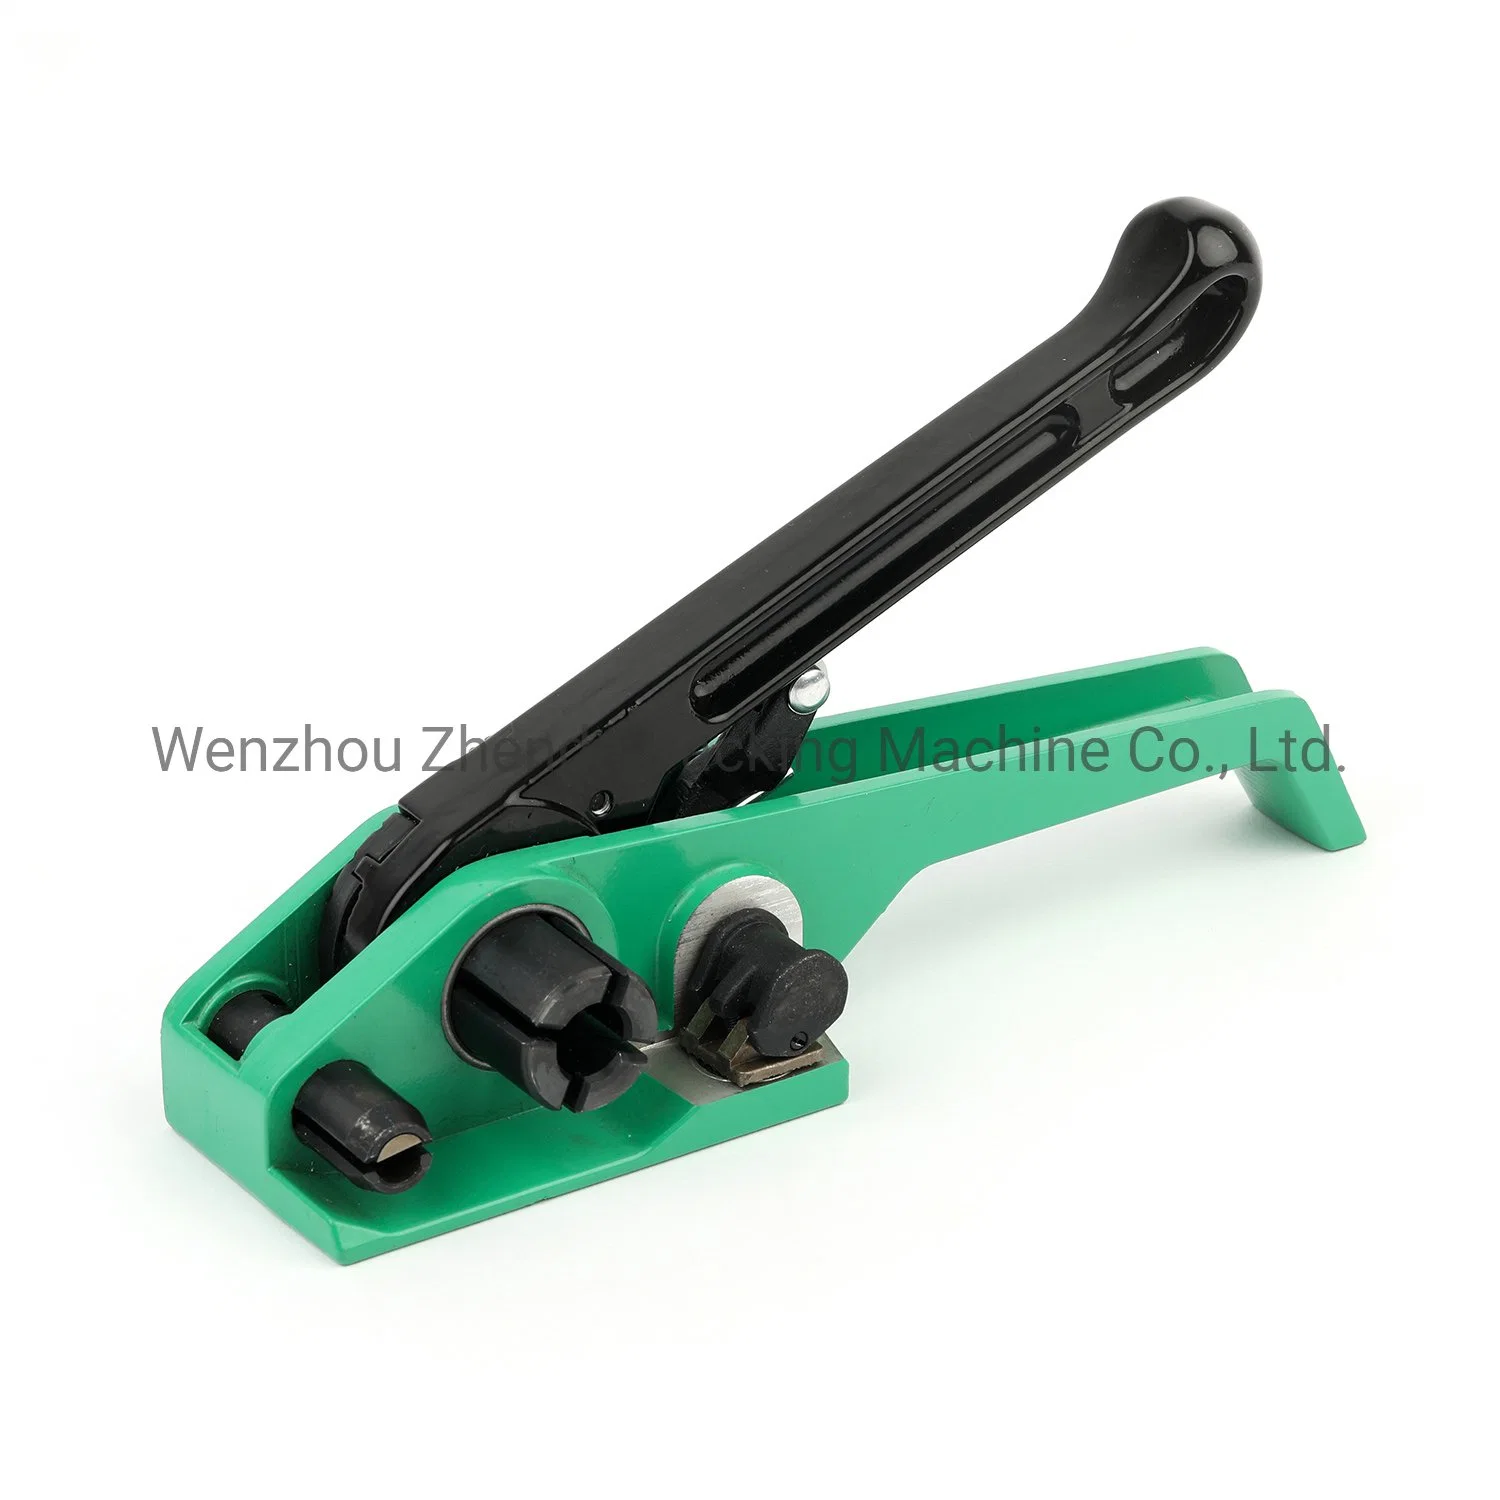 Tensioner Plastic Strapping up to 5/8" Wide Strap (B315)